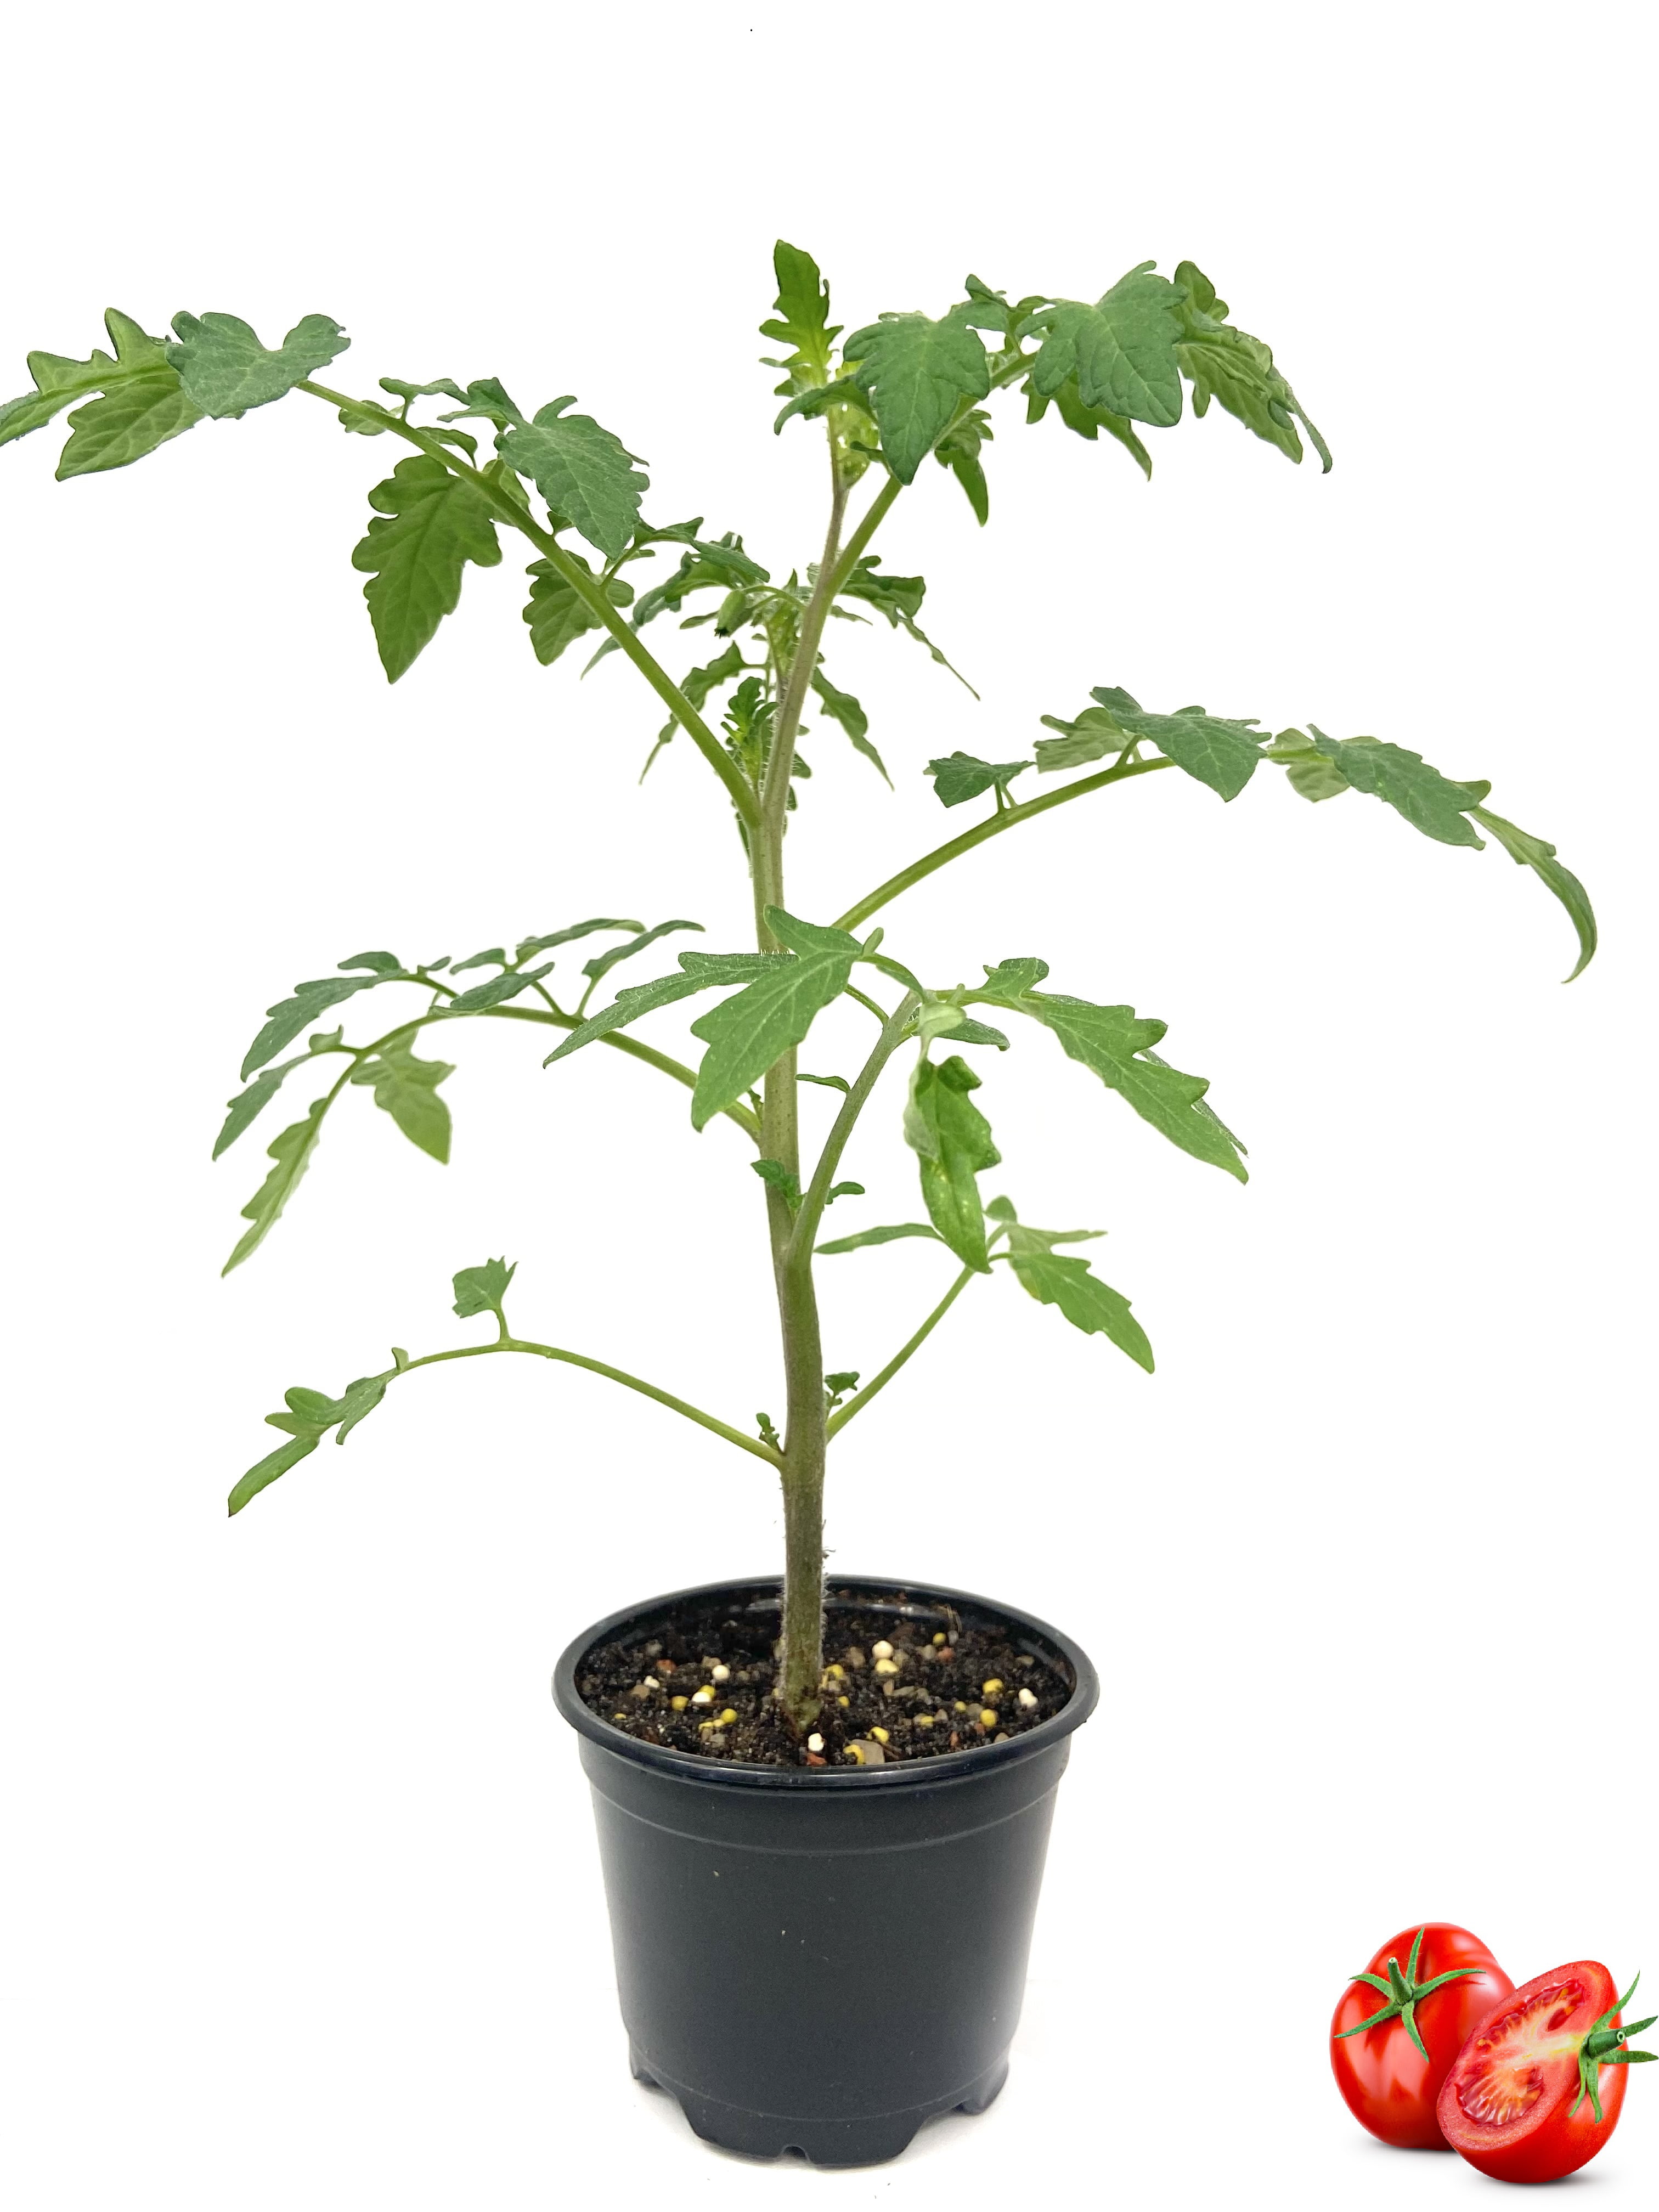 Patio Tomato Plant - Live Plant in a 4 inch Pot - Growers Choice Based on  Season and Availability - Easy to Grow Vegetable - Indoor Outdoor Kitchen  Garden Vegetable 